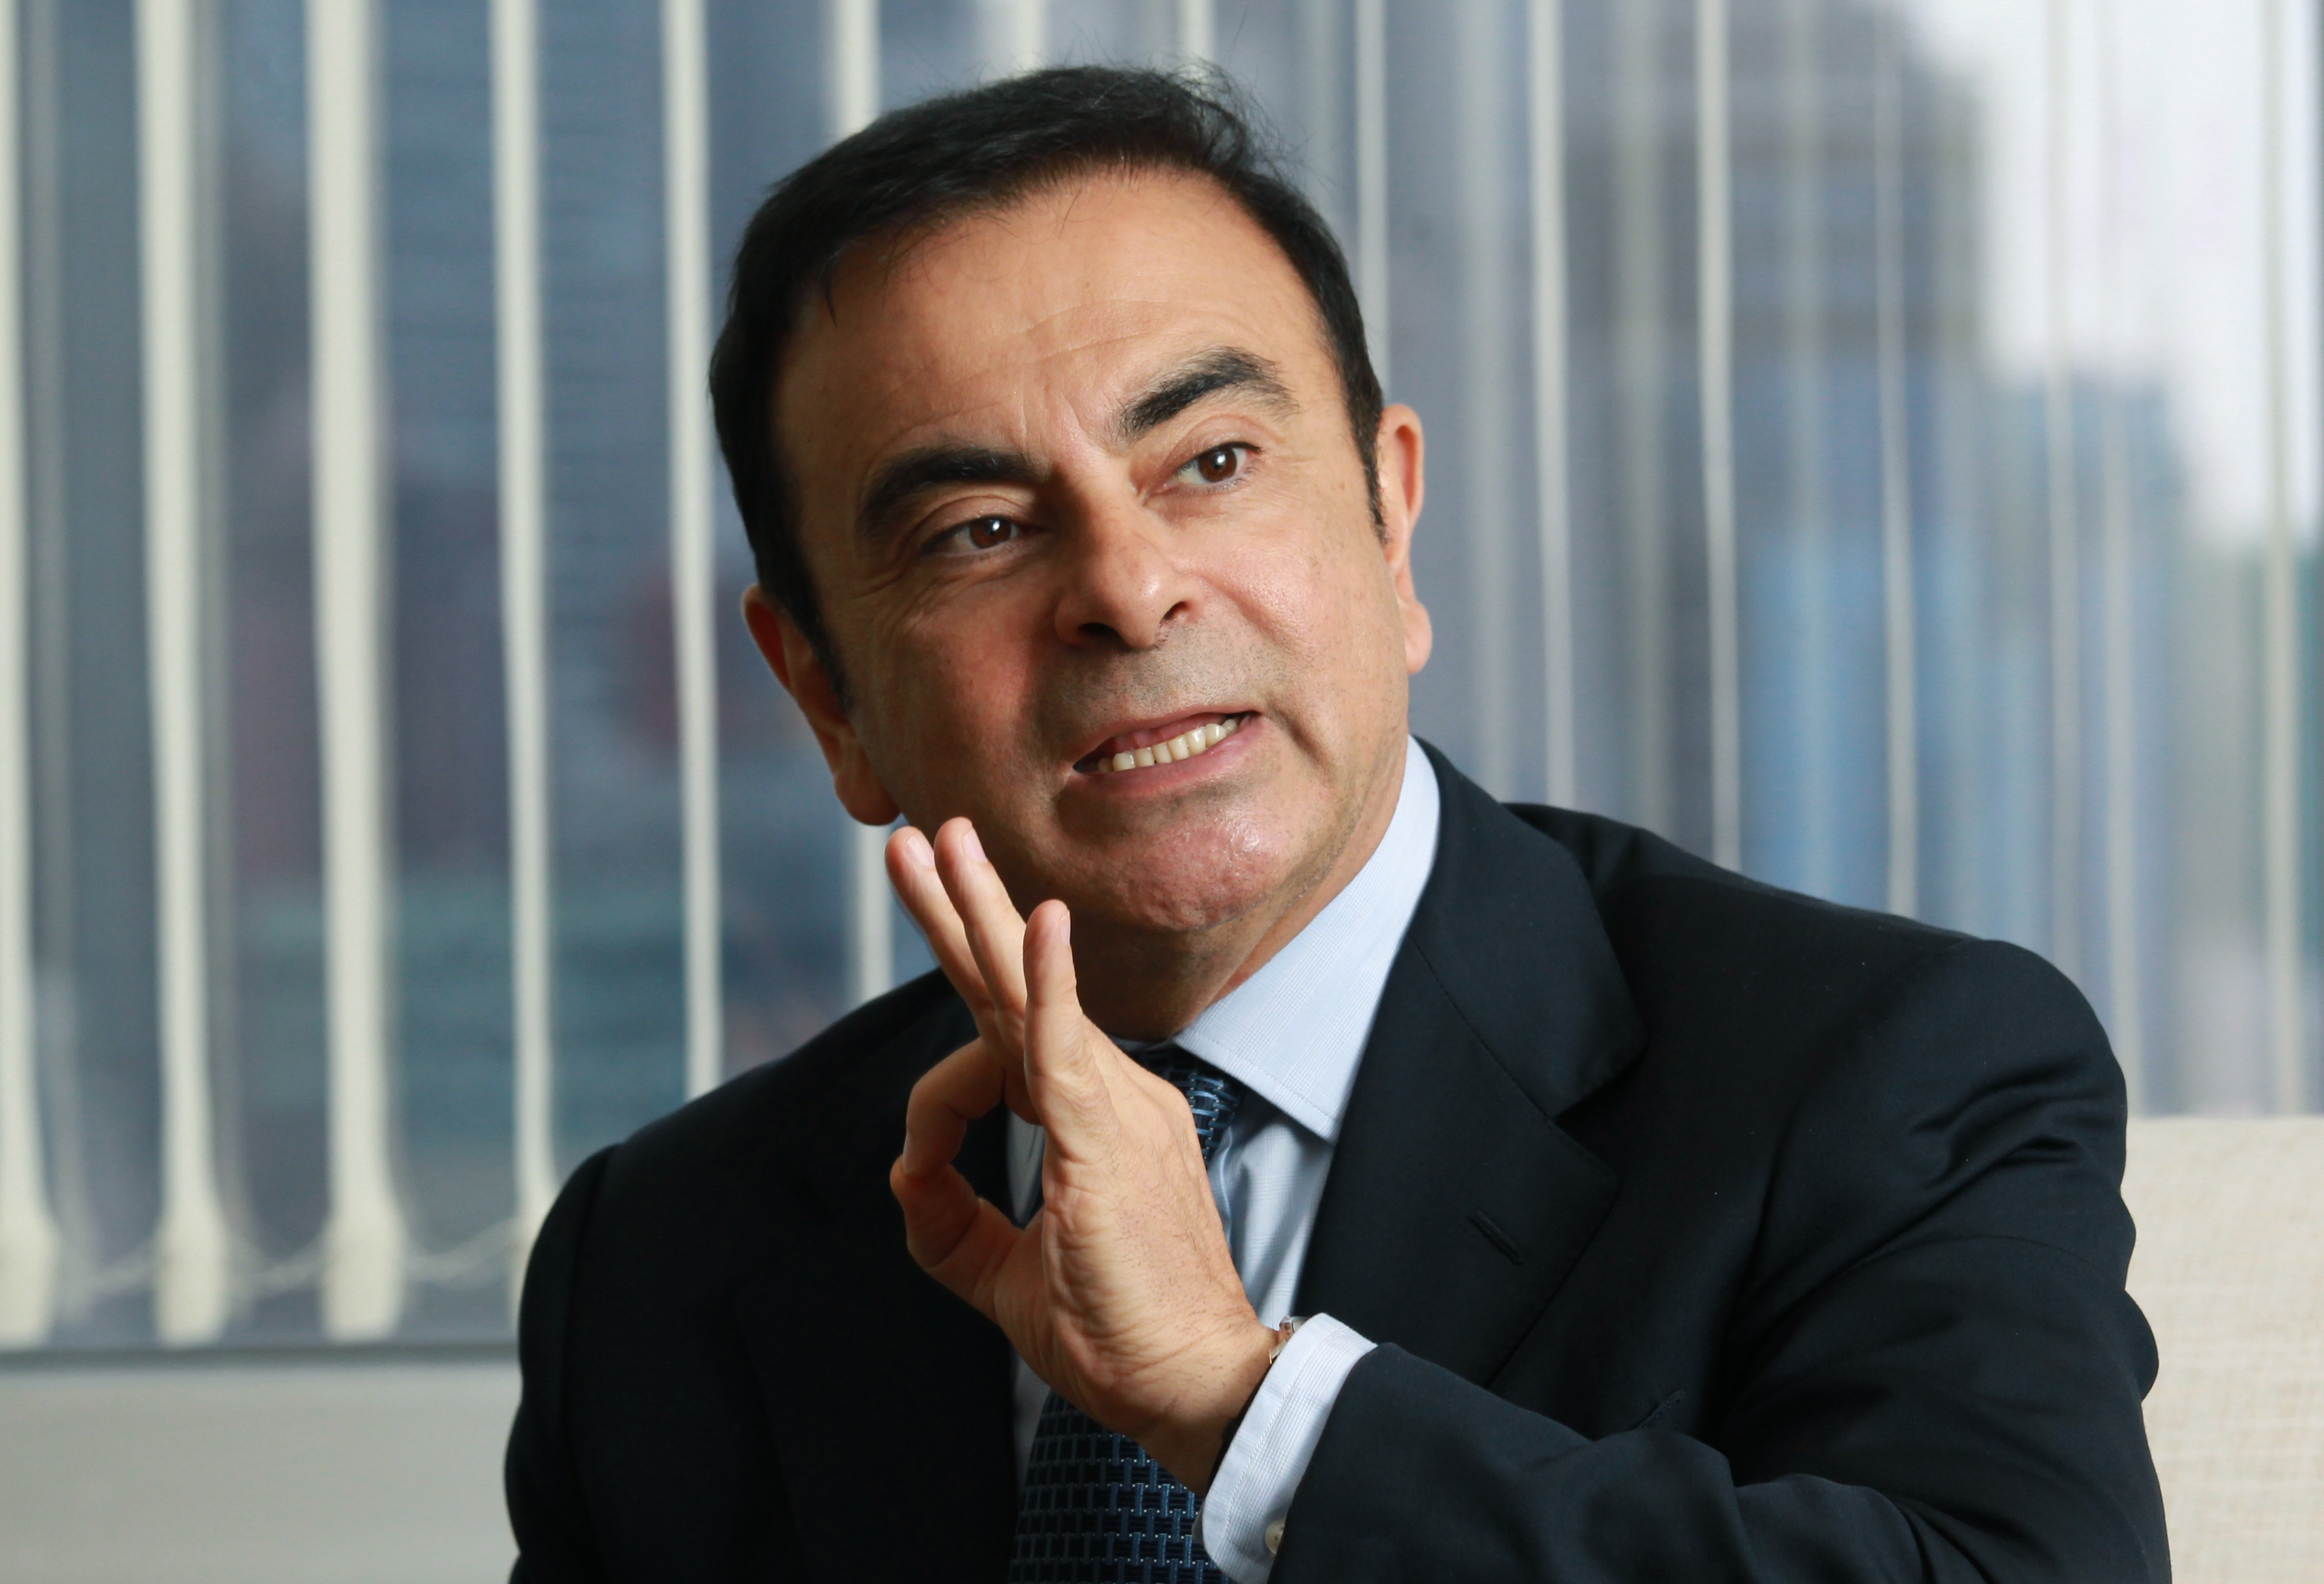 Carlos Ghosn, former CEO of Nissan, pictured in 2012.